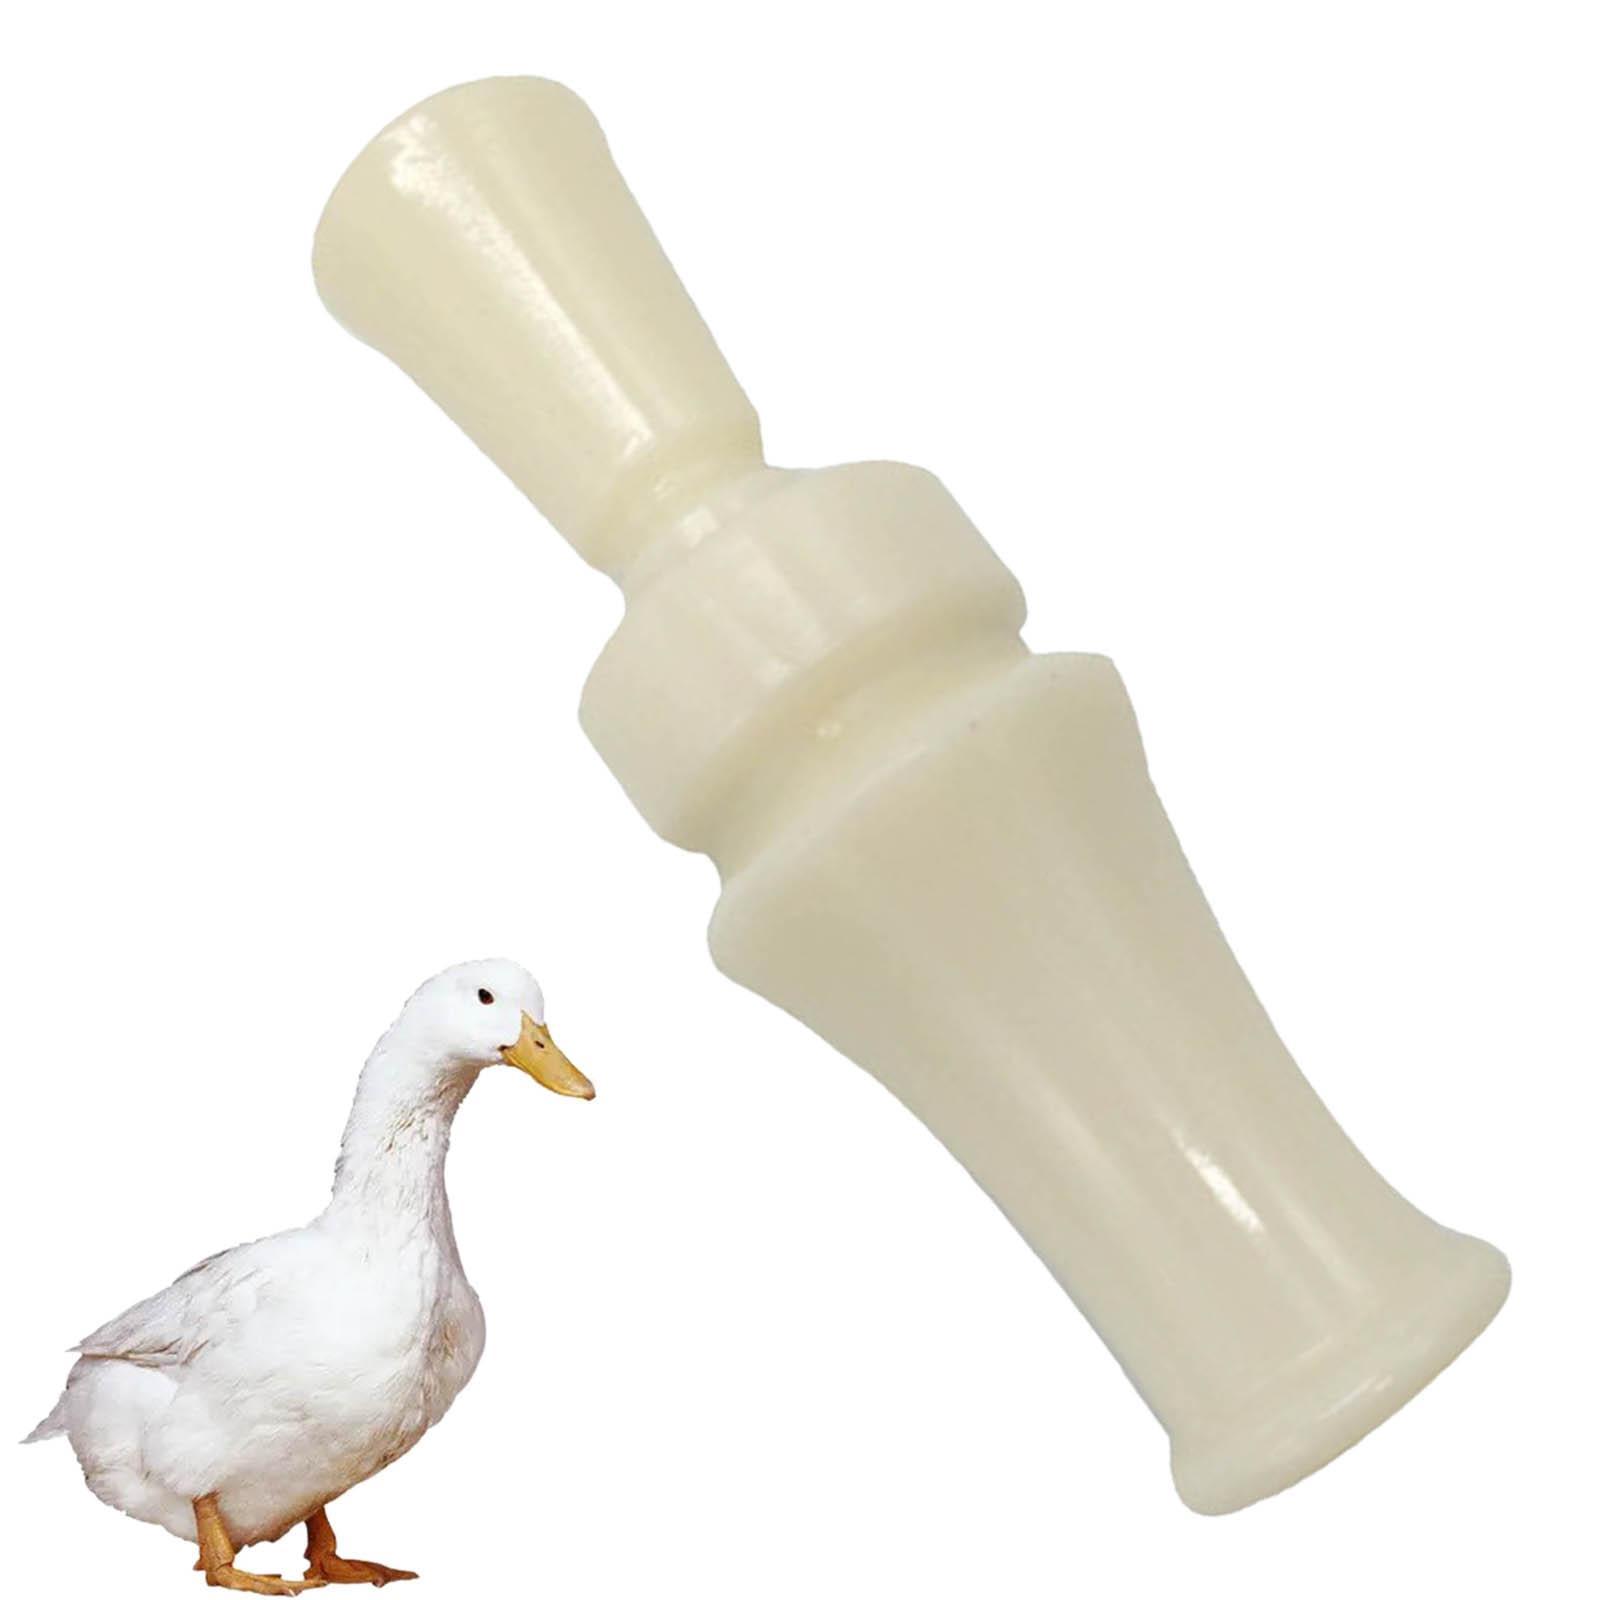 Outdoor Duck Call Whistle Decoy Sound Lure Mallard Mallards Waterfowl Wild Gooses Hunting Animal Calling Accessory